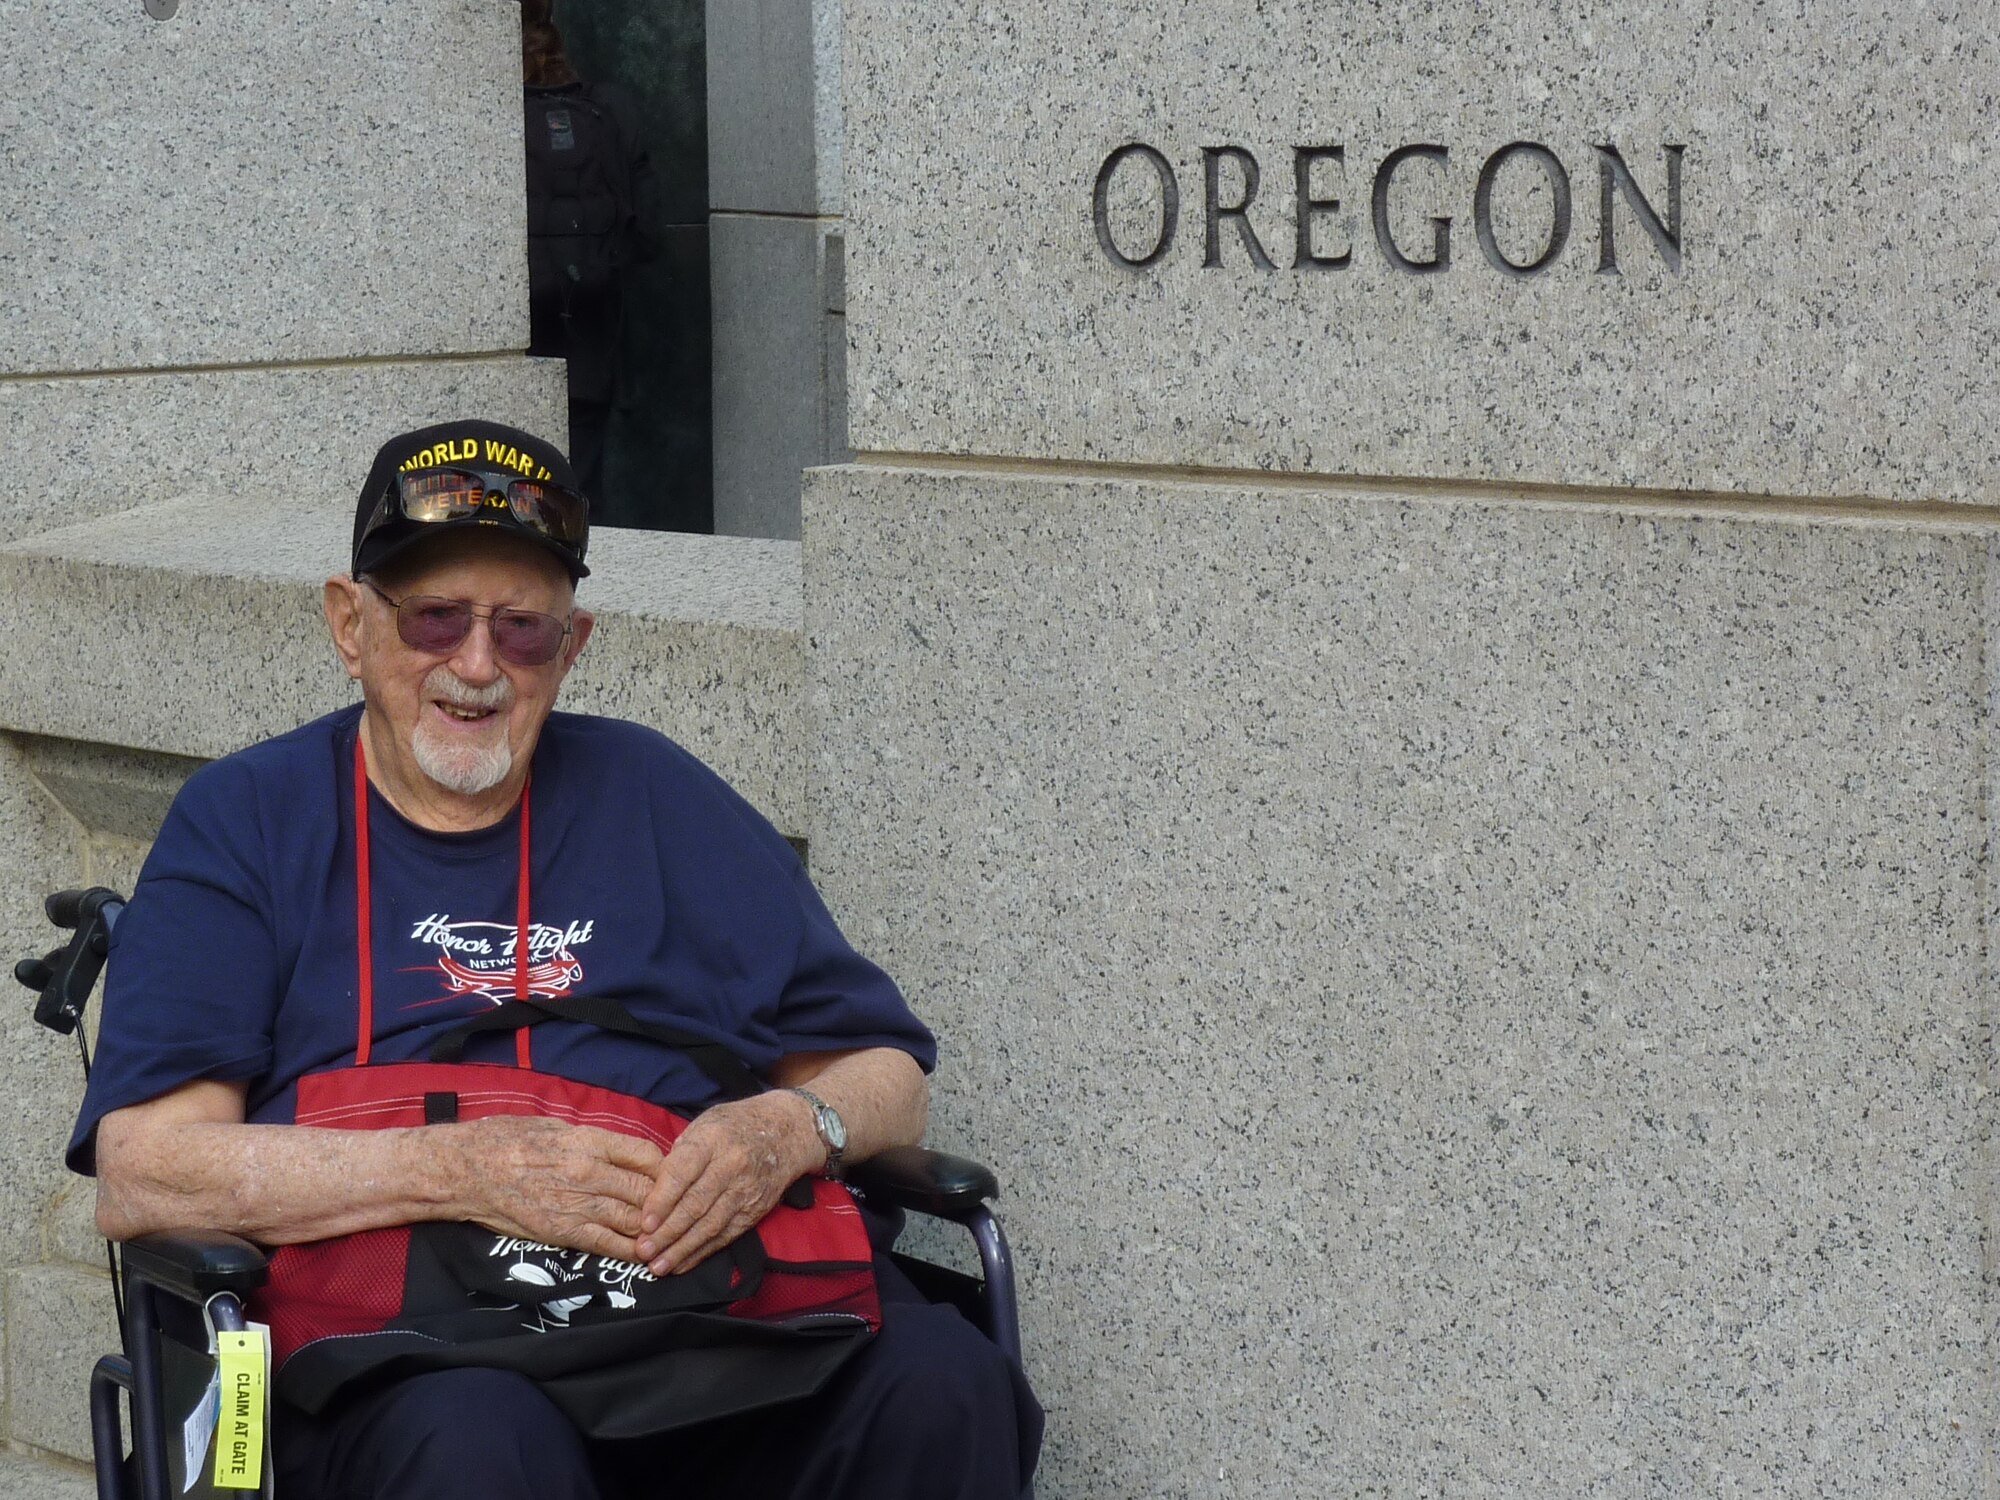 Fred Parish, of La Grande, Oregon, sits beside the granite pillar honoring Oregon and its veterans at the World War II Memorial during a recent Honor Flight trip to Washington, D.C.  Parish is a pioneering member of the Oregon National Guard’s 123rd Observation Squadron and served on active duty in the Army Air Corps during World War II.  He served as a medic both stateside and in the China-Burma-India theaters during the war, and attained the rank of Technical Sergeant.